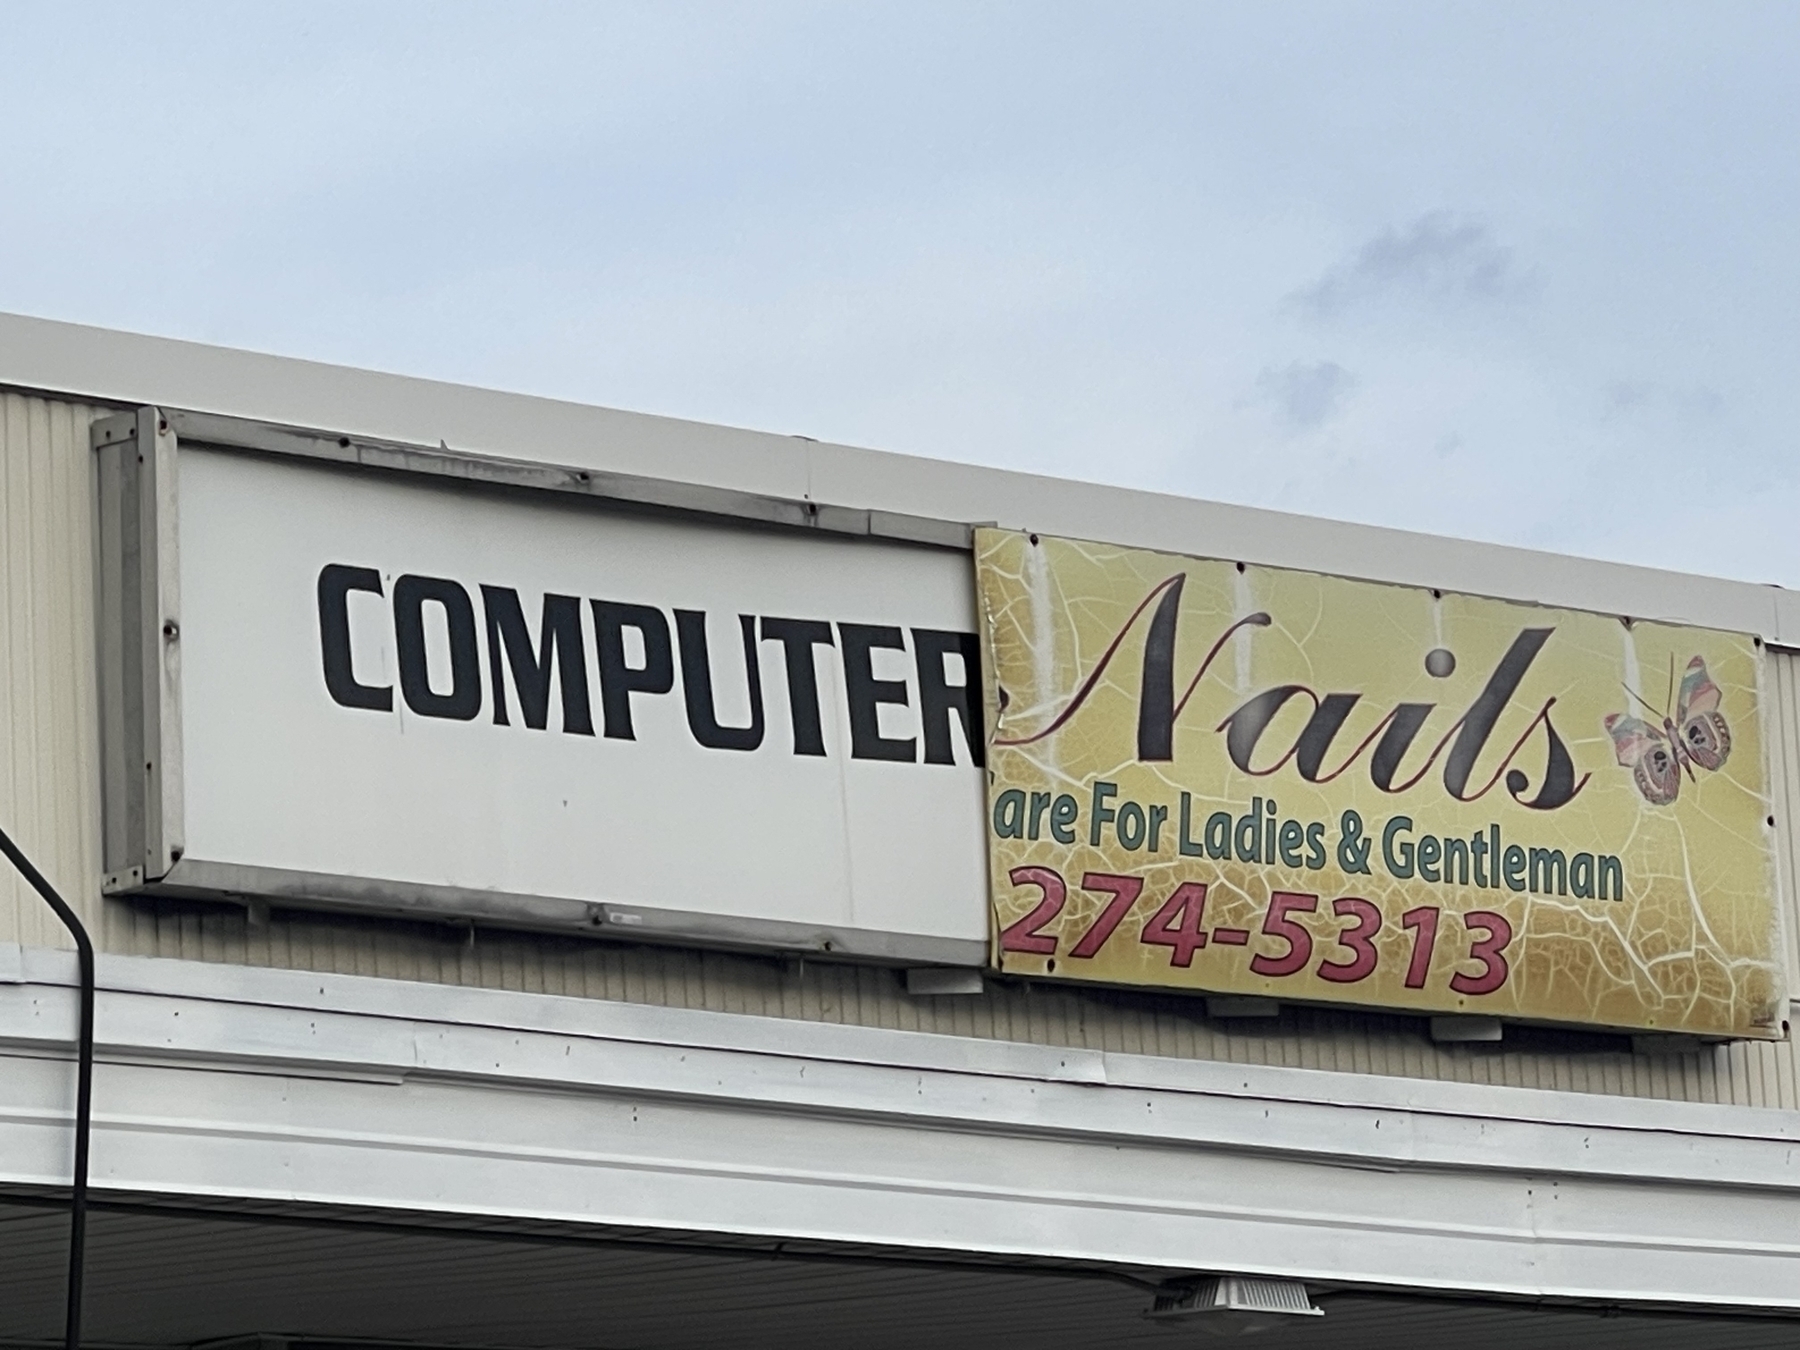 Sign with half fallen off and old part showing. Left reads “computer” and right “nails”.